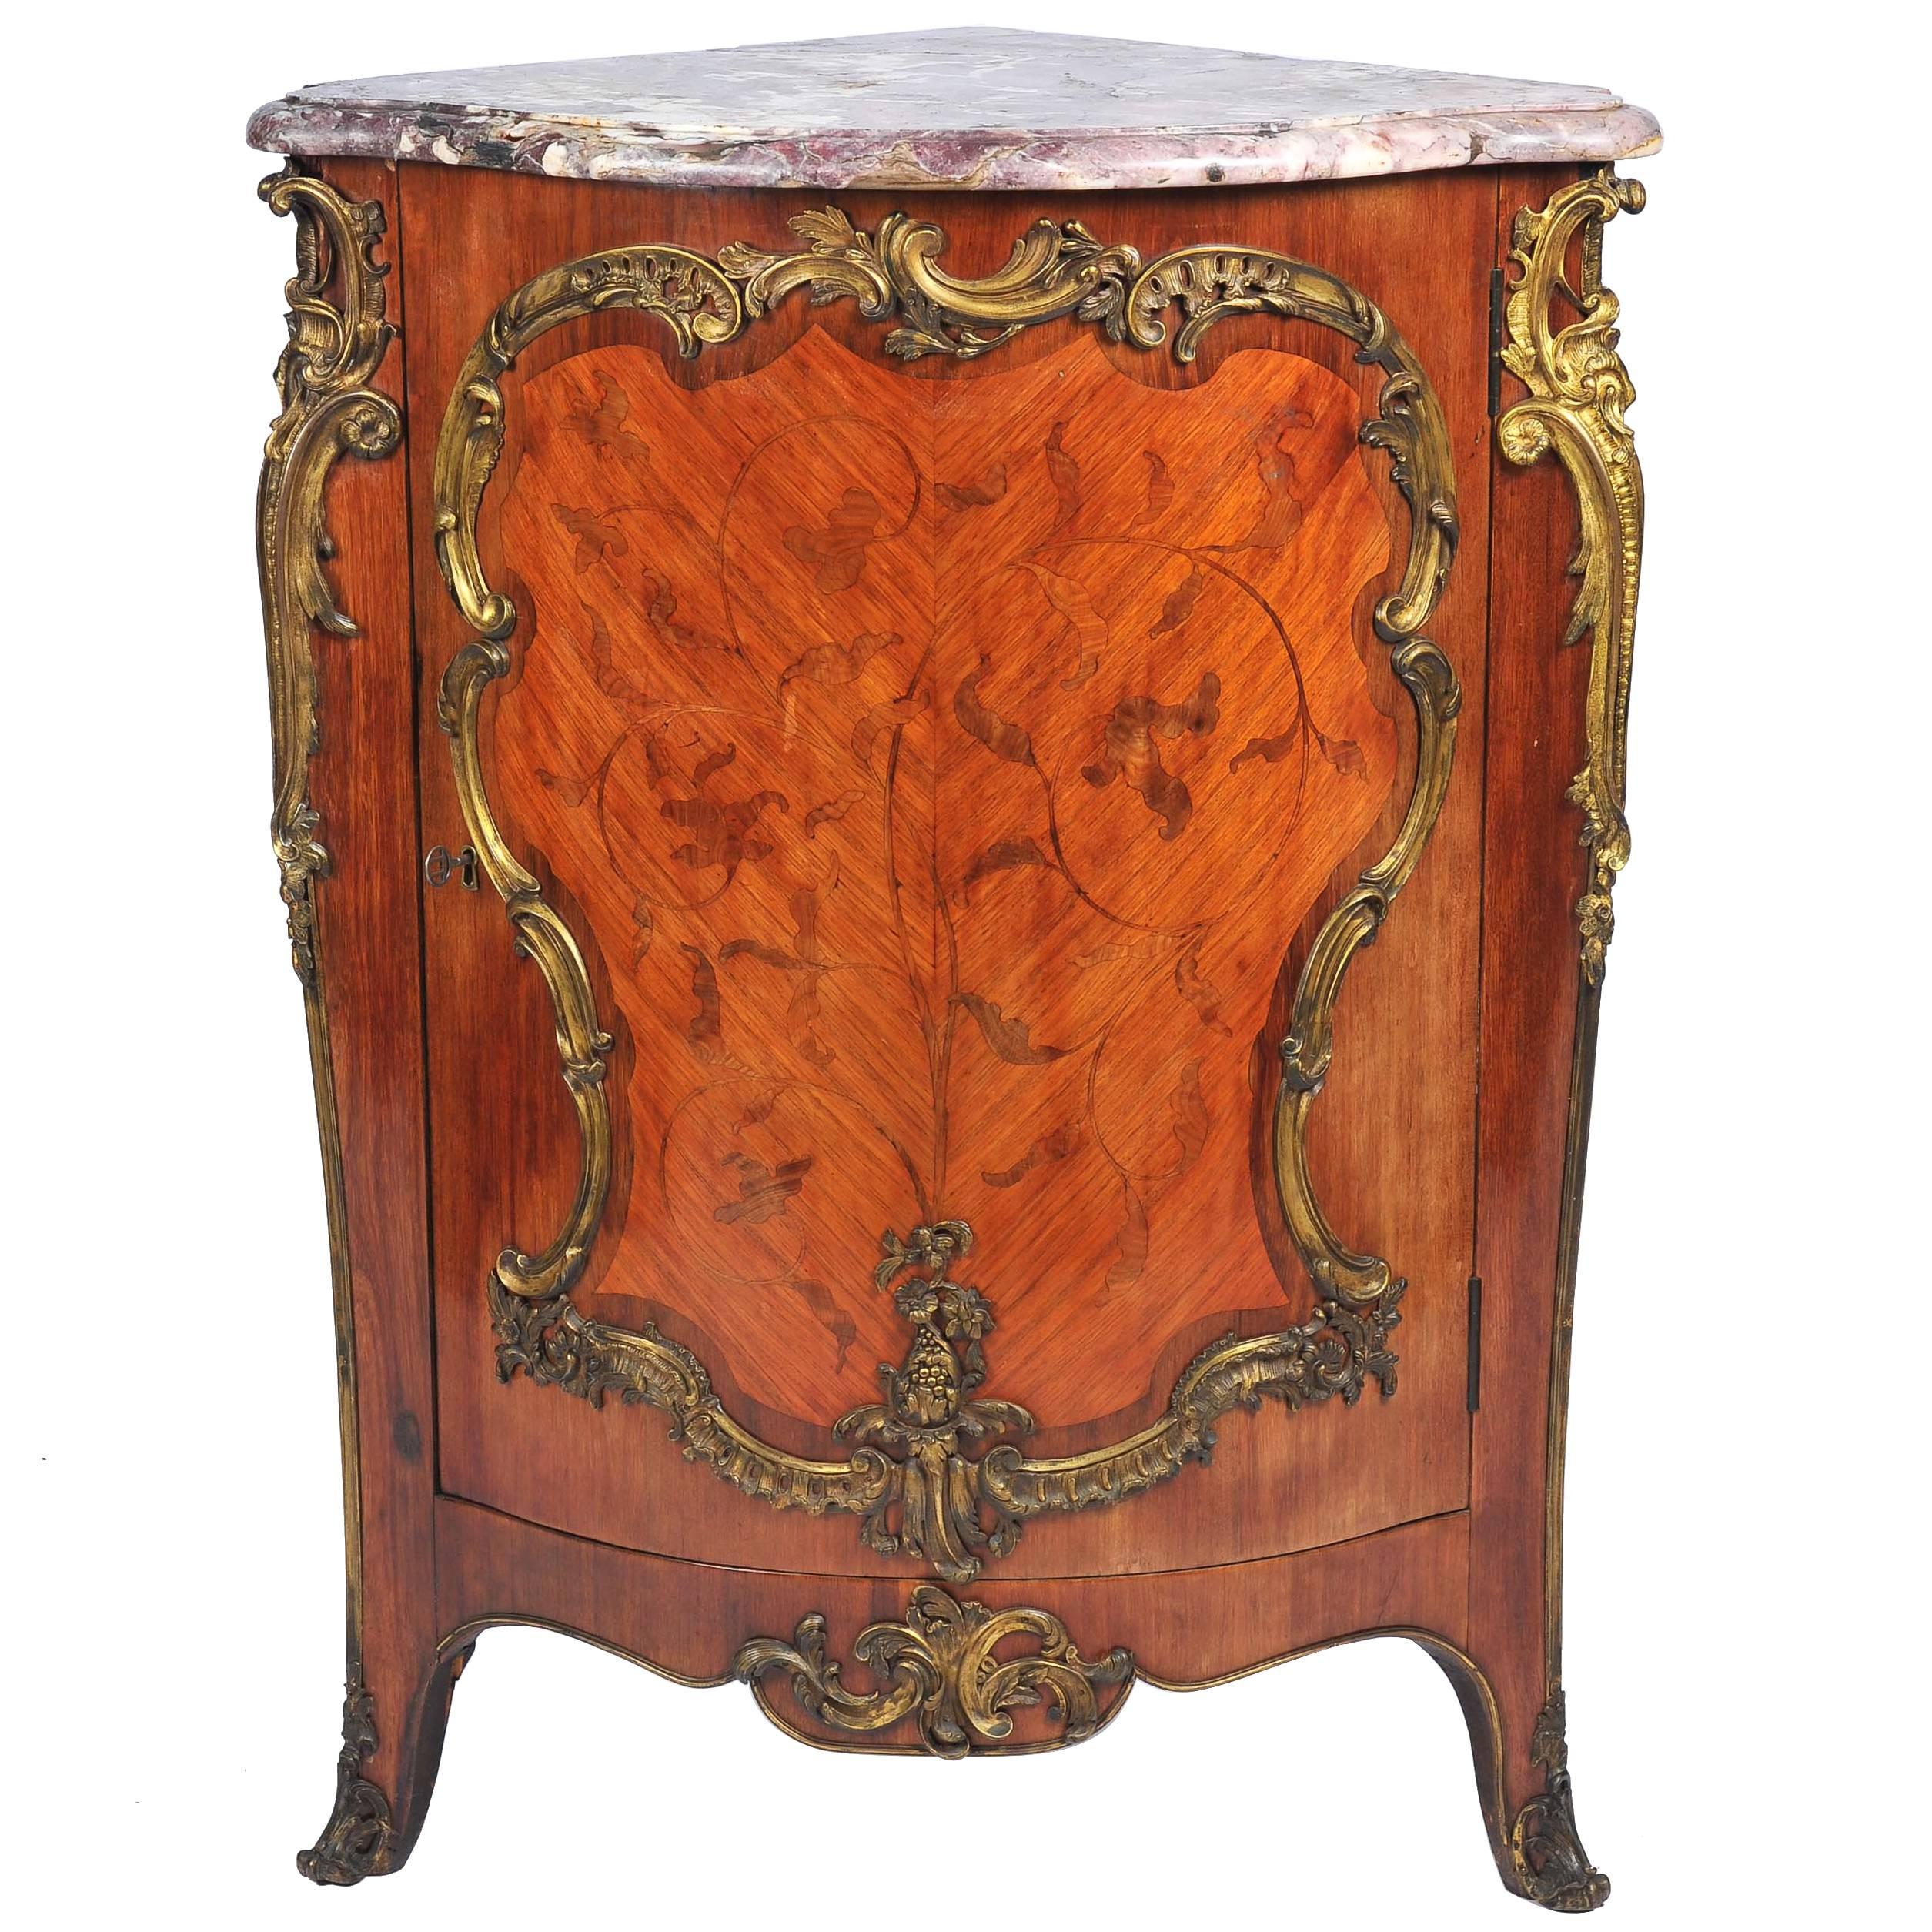 19th Century, French, Kingwood Marquetry Corner Cabinet